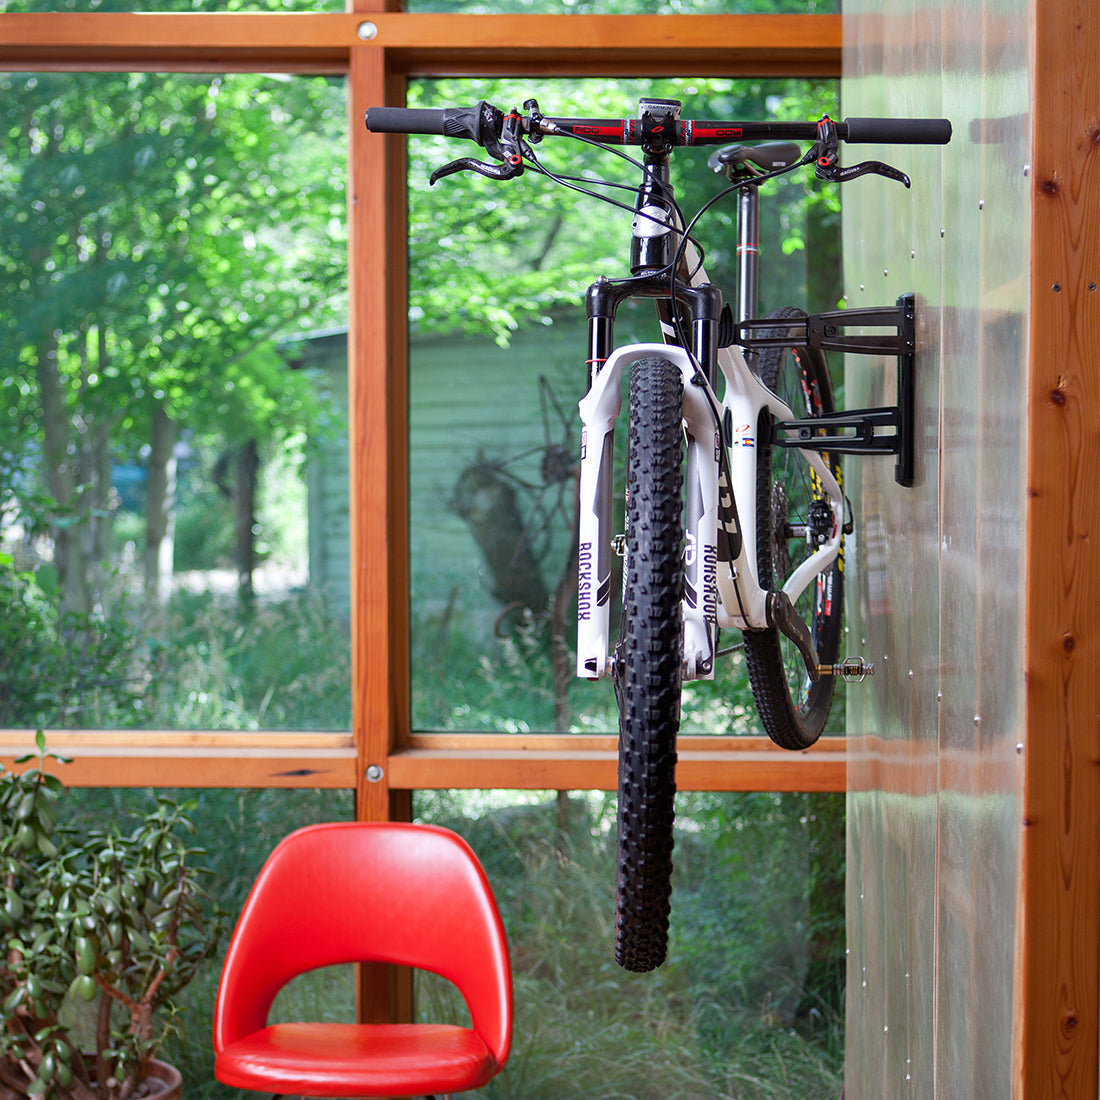 Mountain bike installed on interior wall storage cradle arms with windows in background.